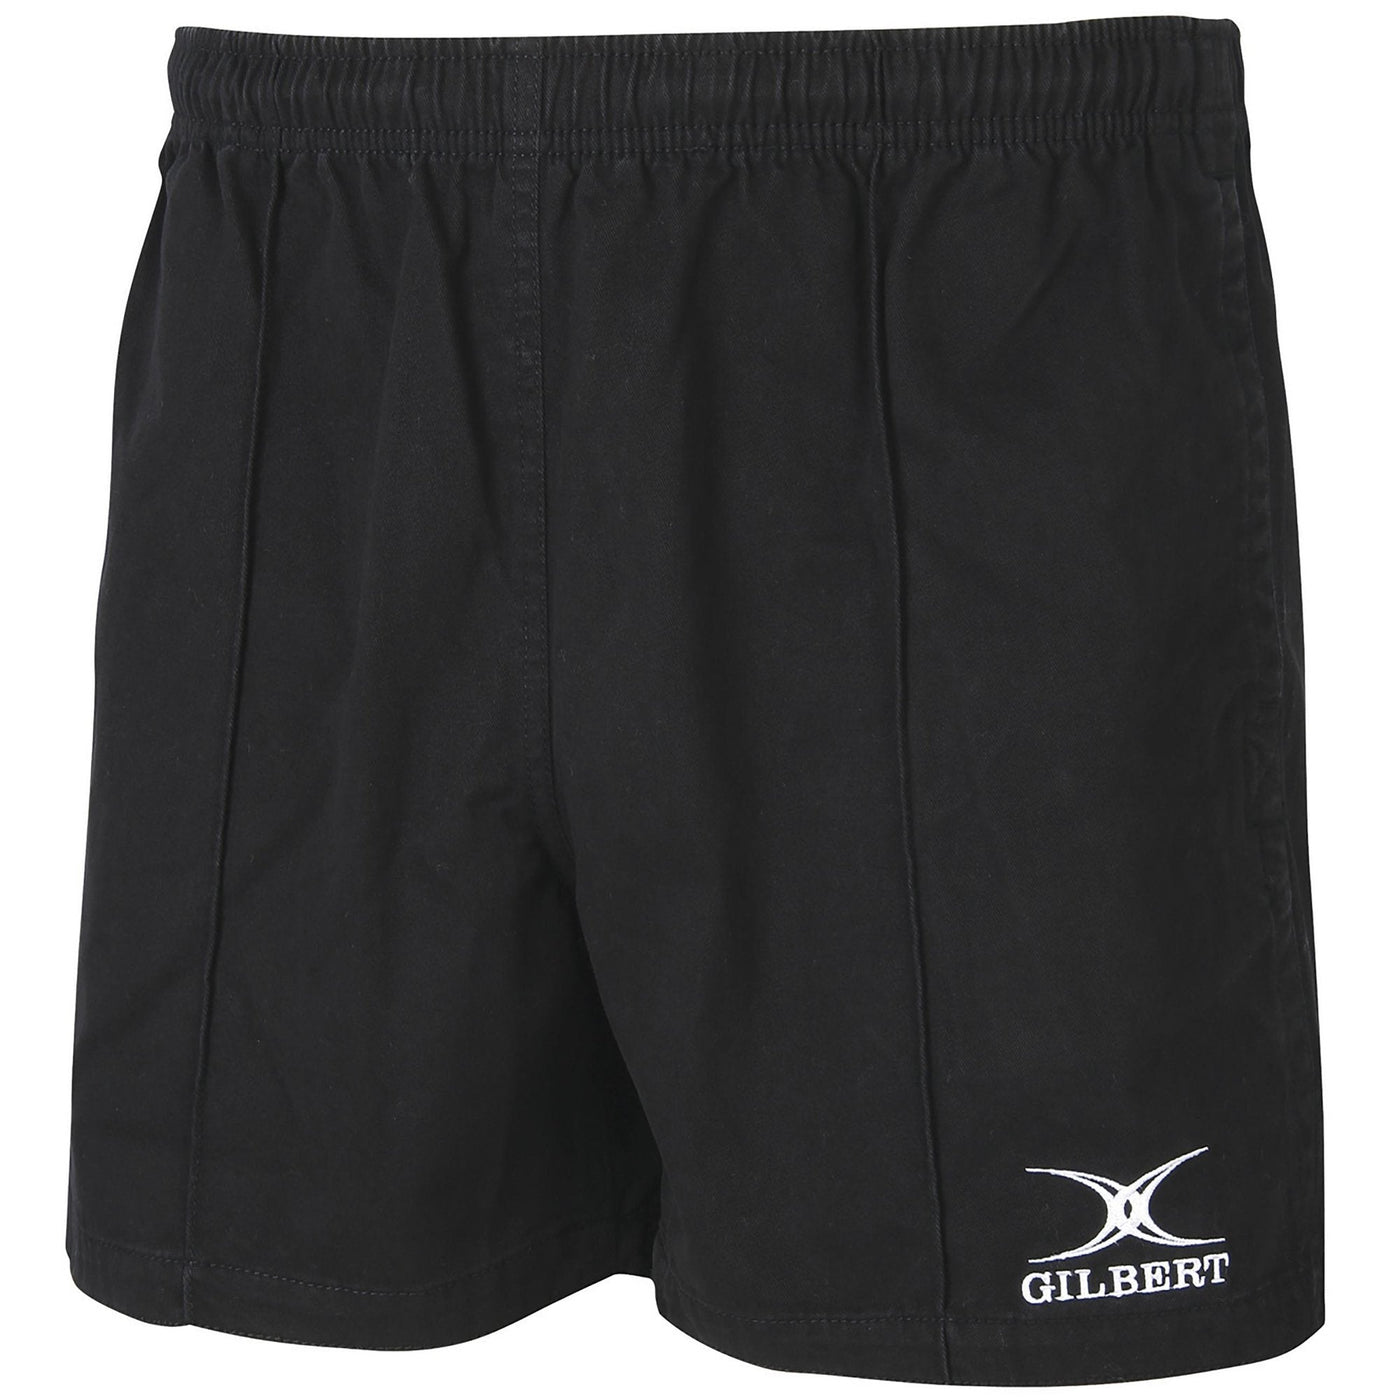 Kiwi Pro Rugby Short Black (with pockets)